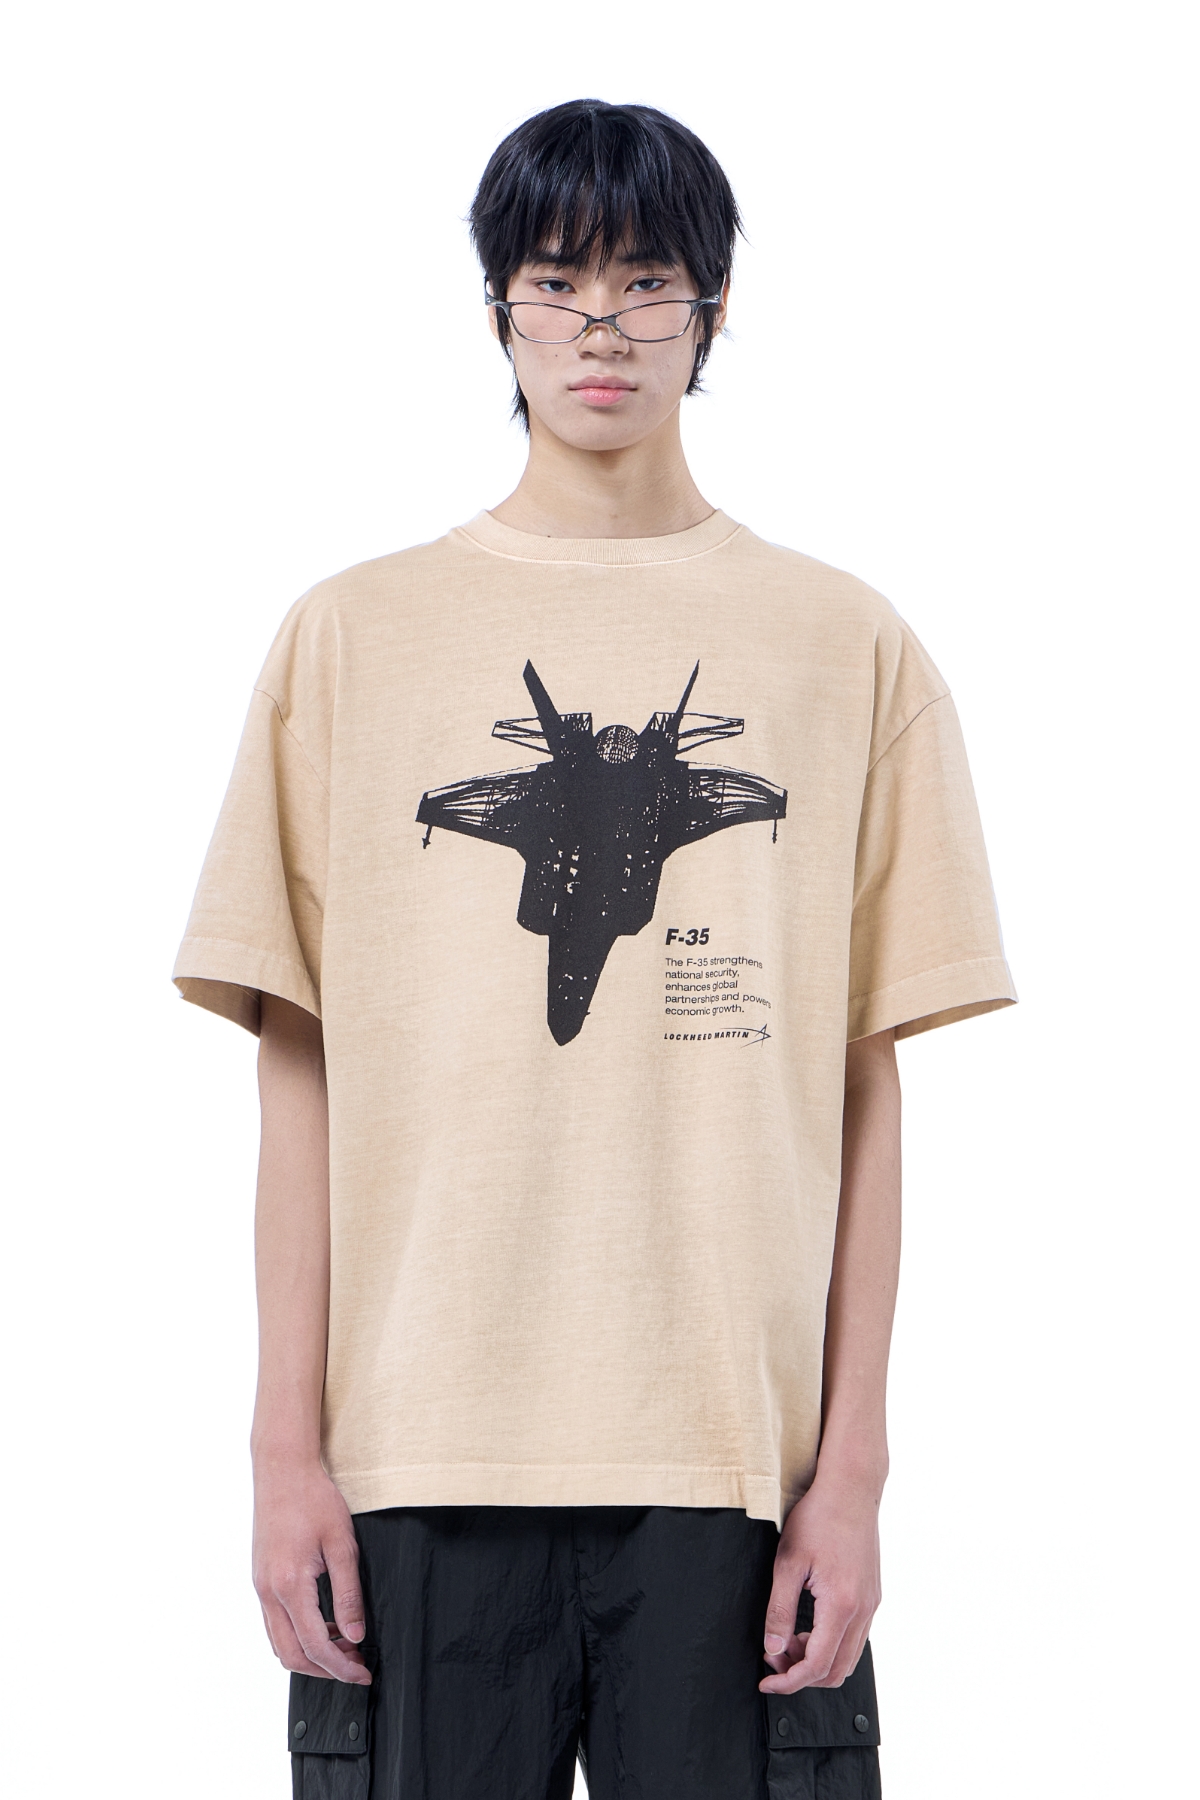 LM F-35 GRAPHIC GARMENT DYED OVER T-SHIRT (BEIGE)